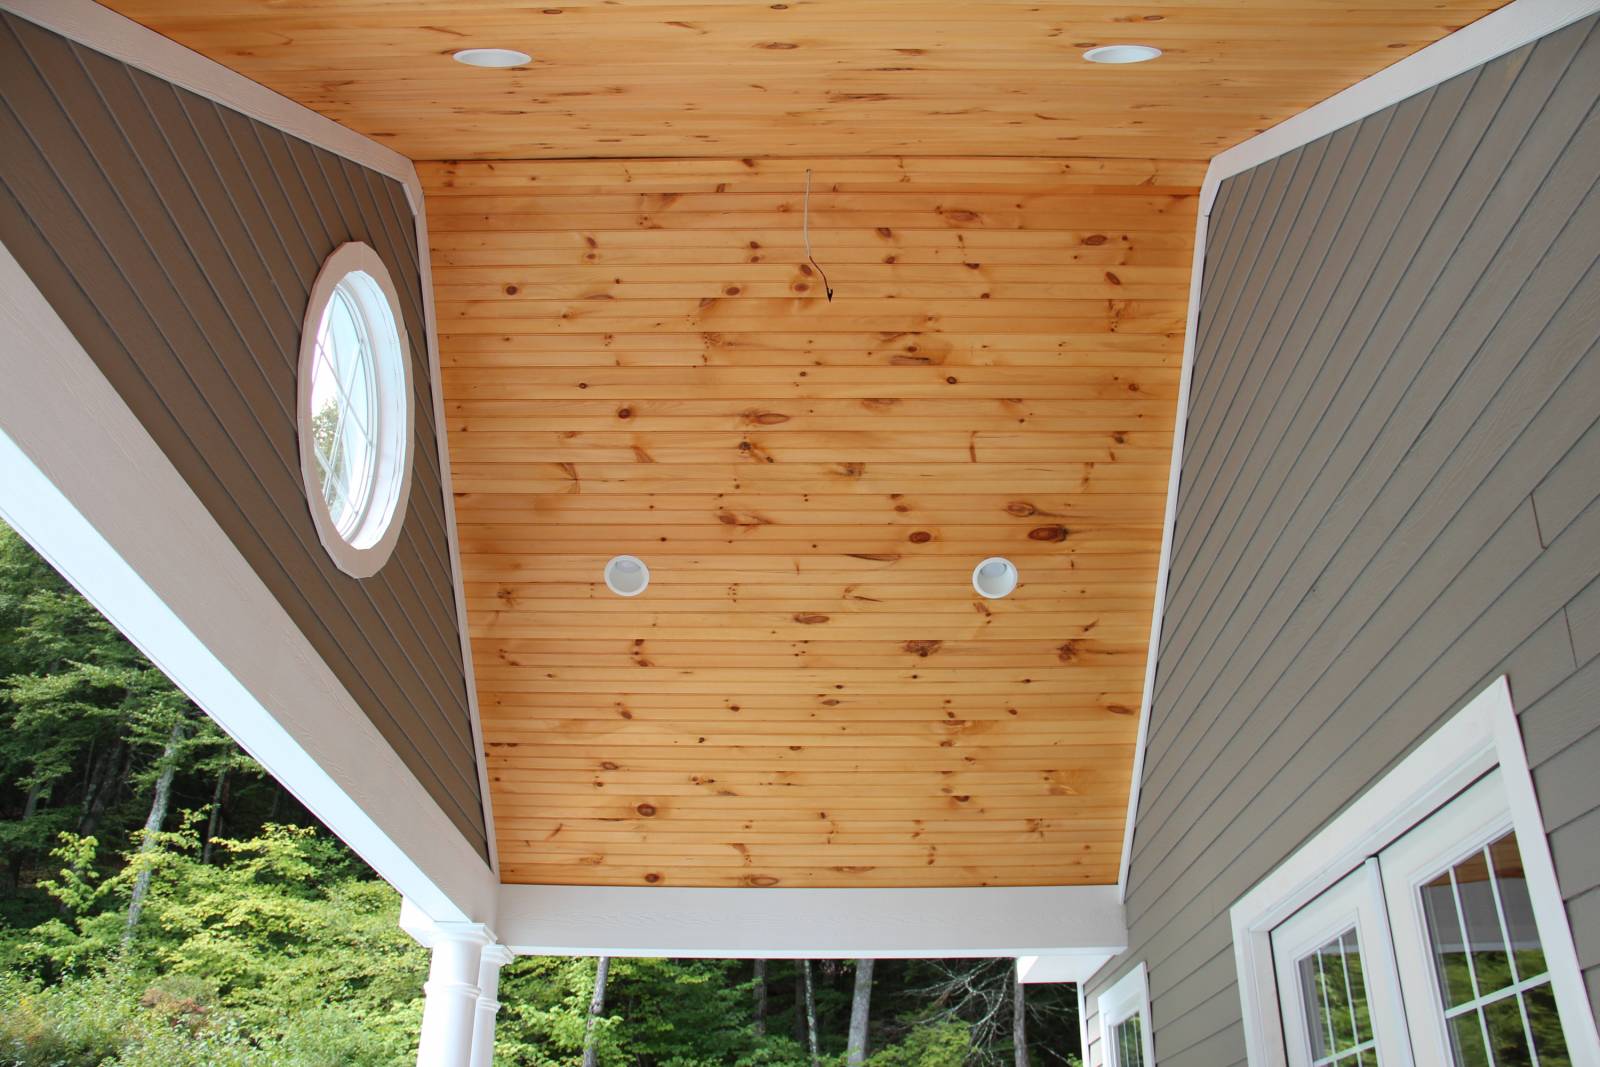 Vaulted pine tongue & groove ceiling